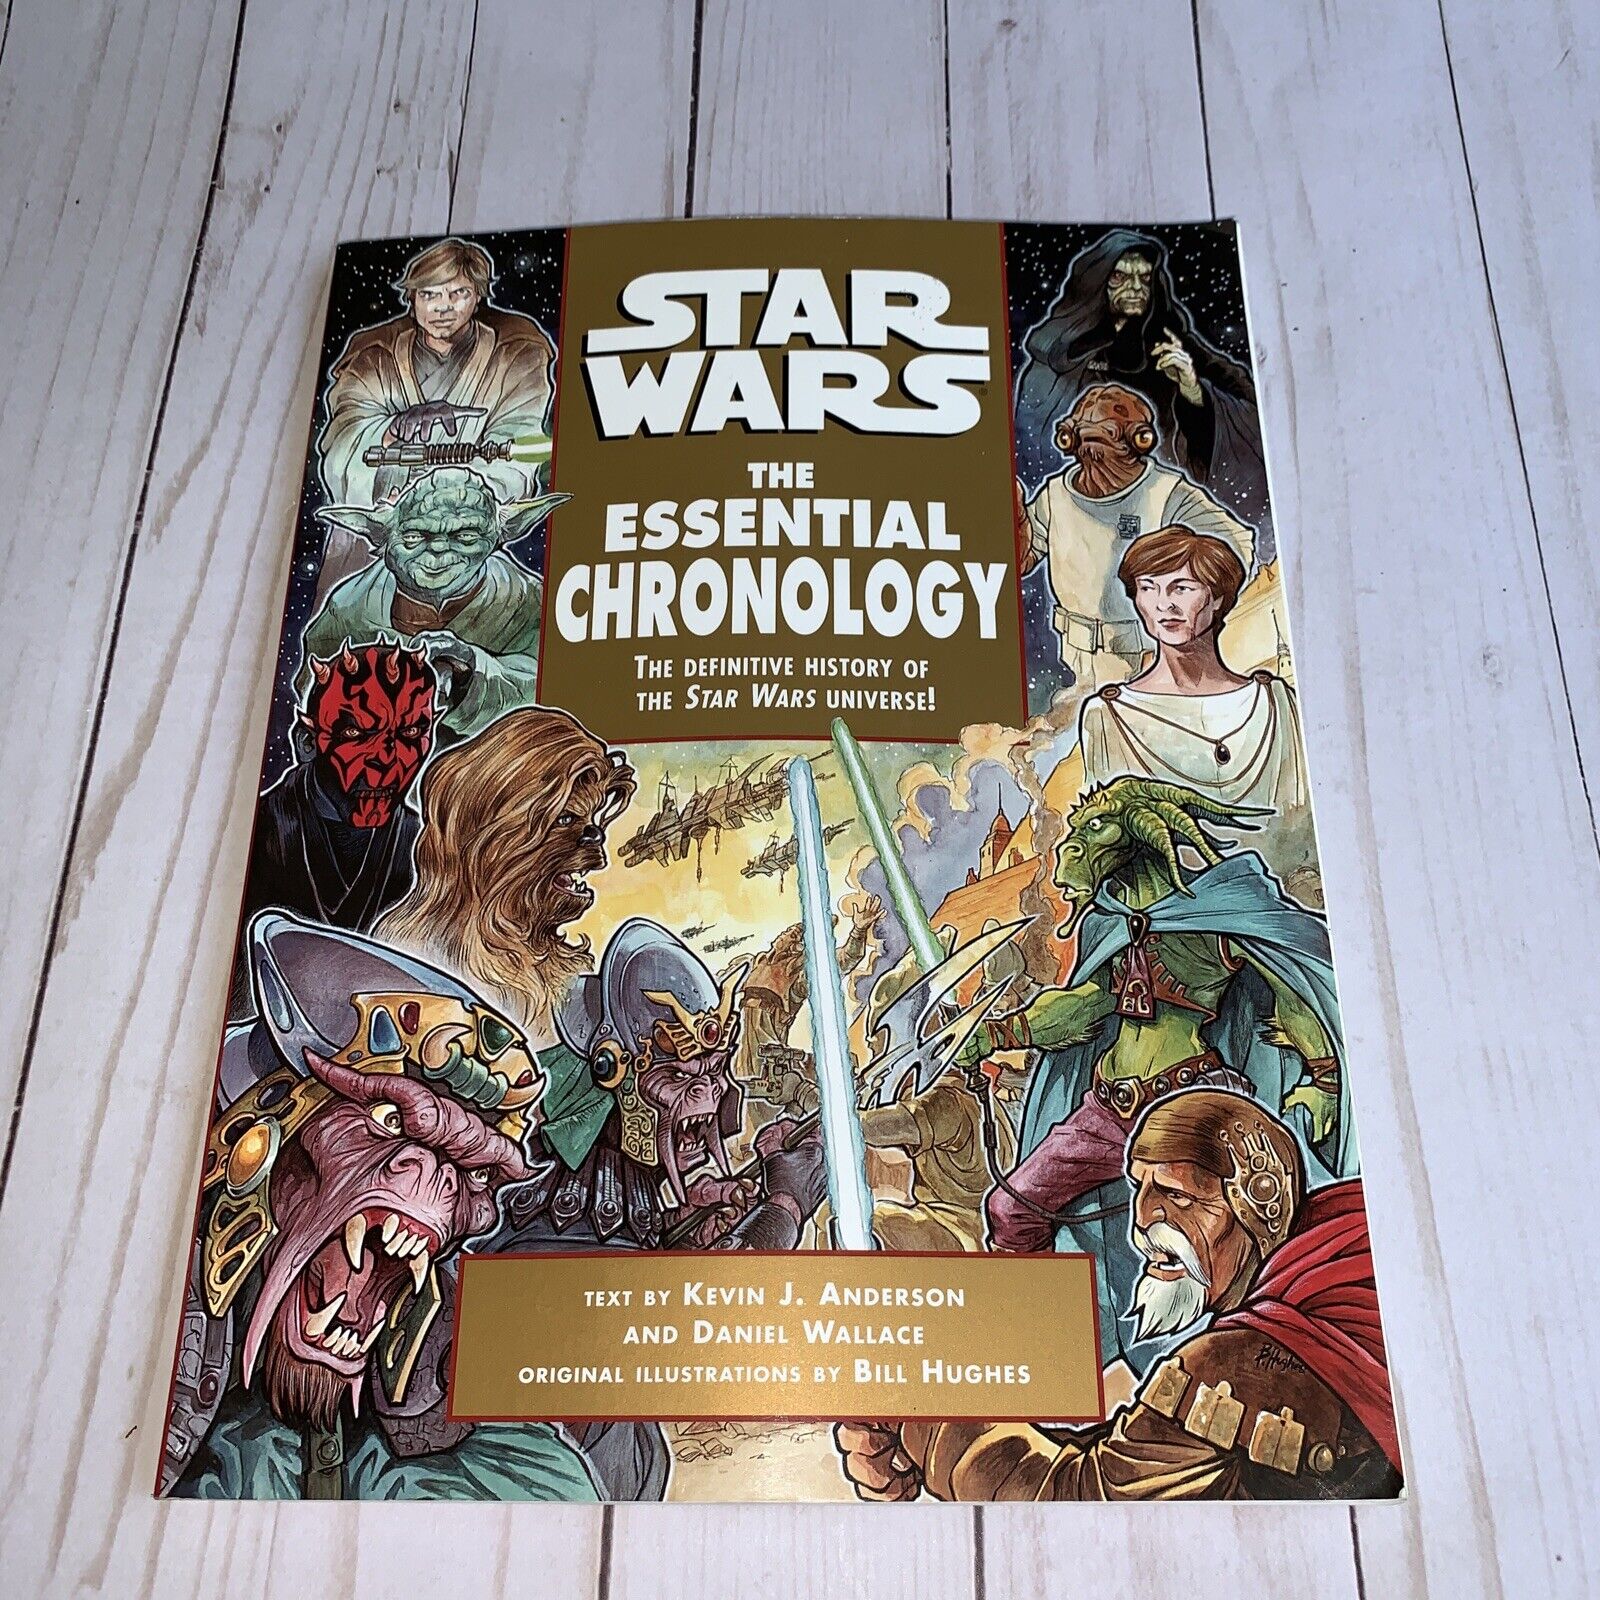 Star Wars The Essential Chronology book - Kevin Anderson/Daniel Wallace